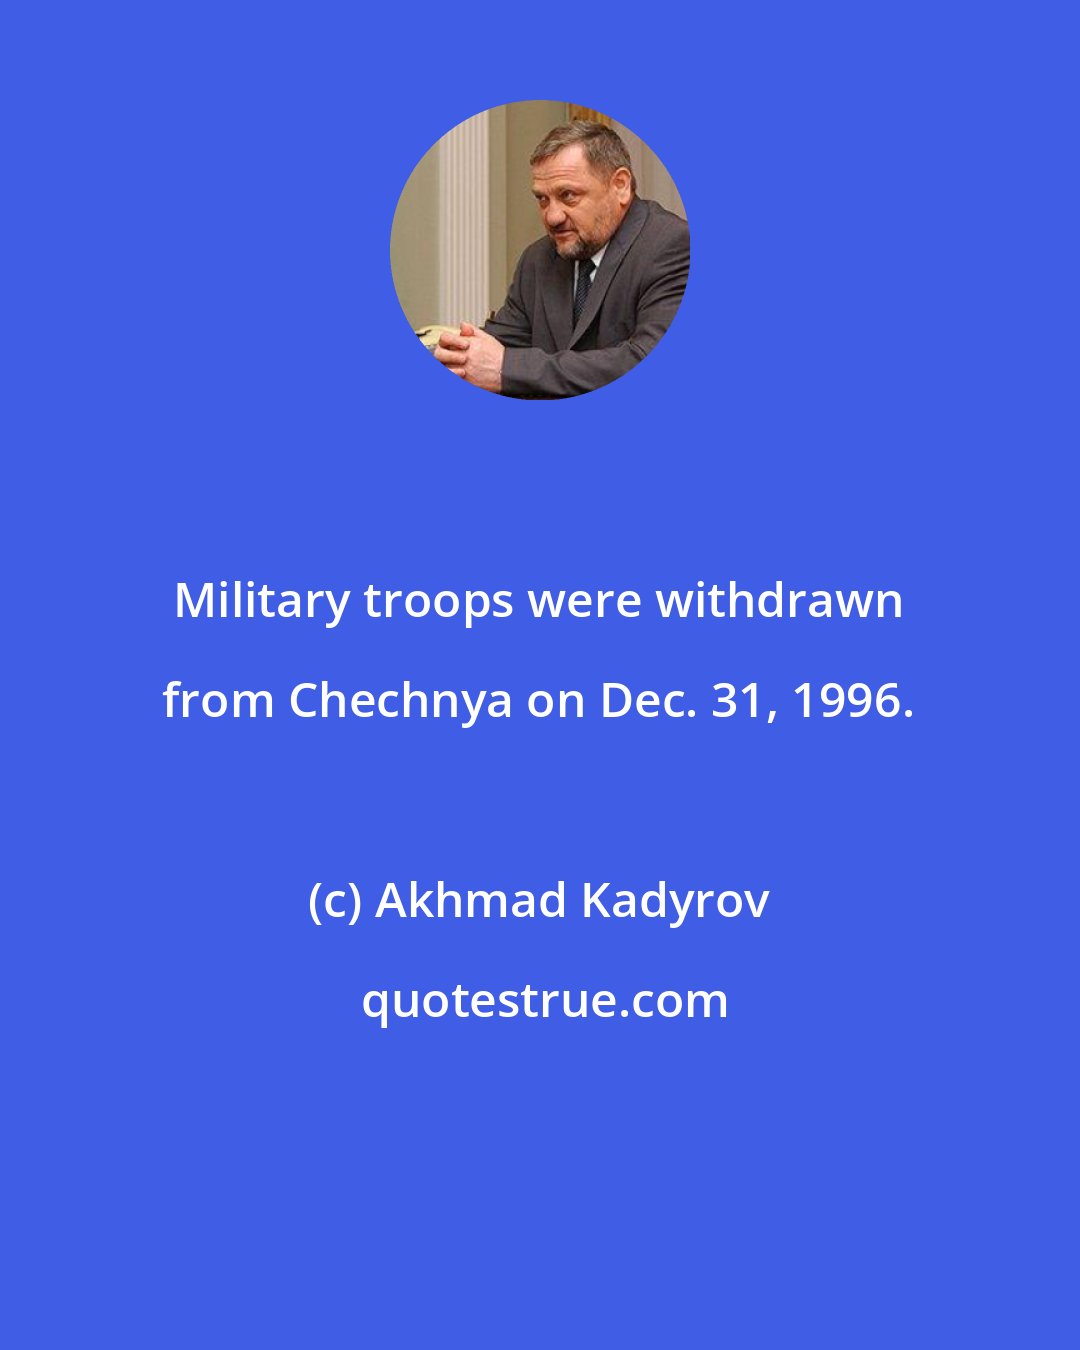 Akhmad Kadyrov: Military troops were withdrawn from Chechnya on Dec. 31, 1996.